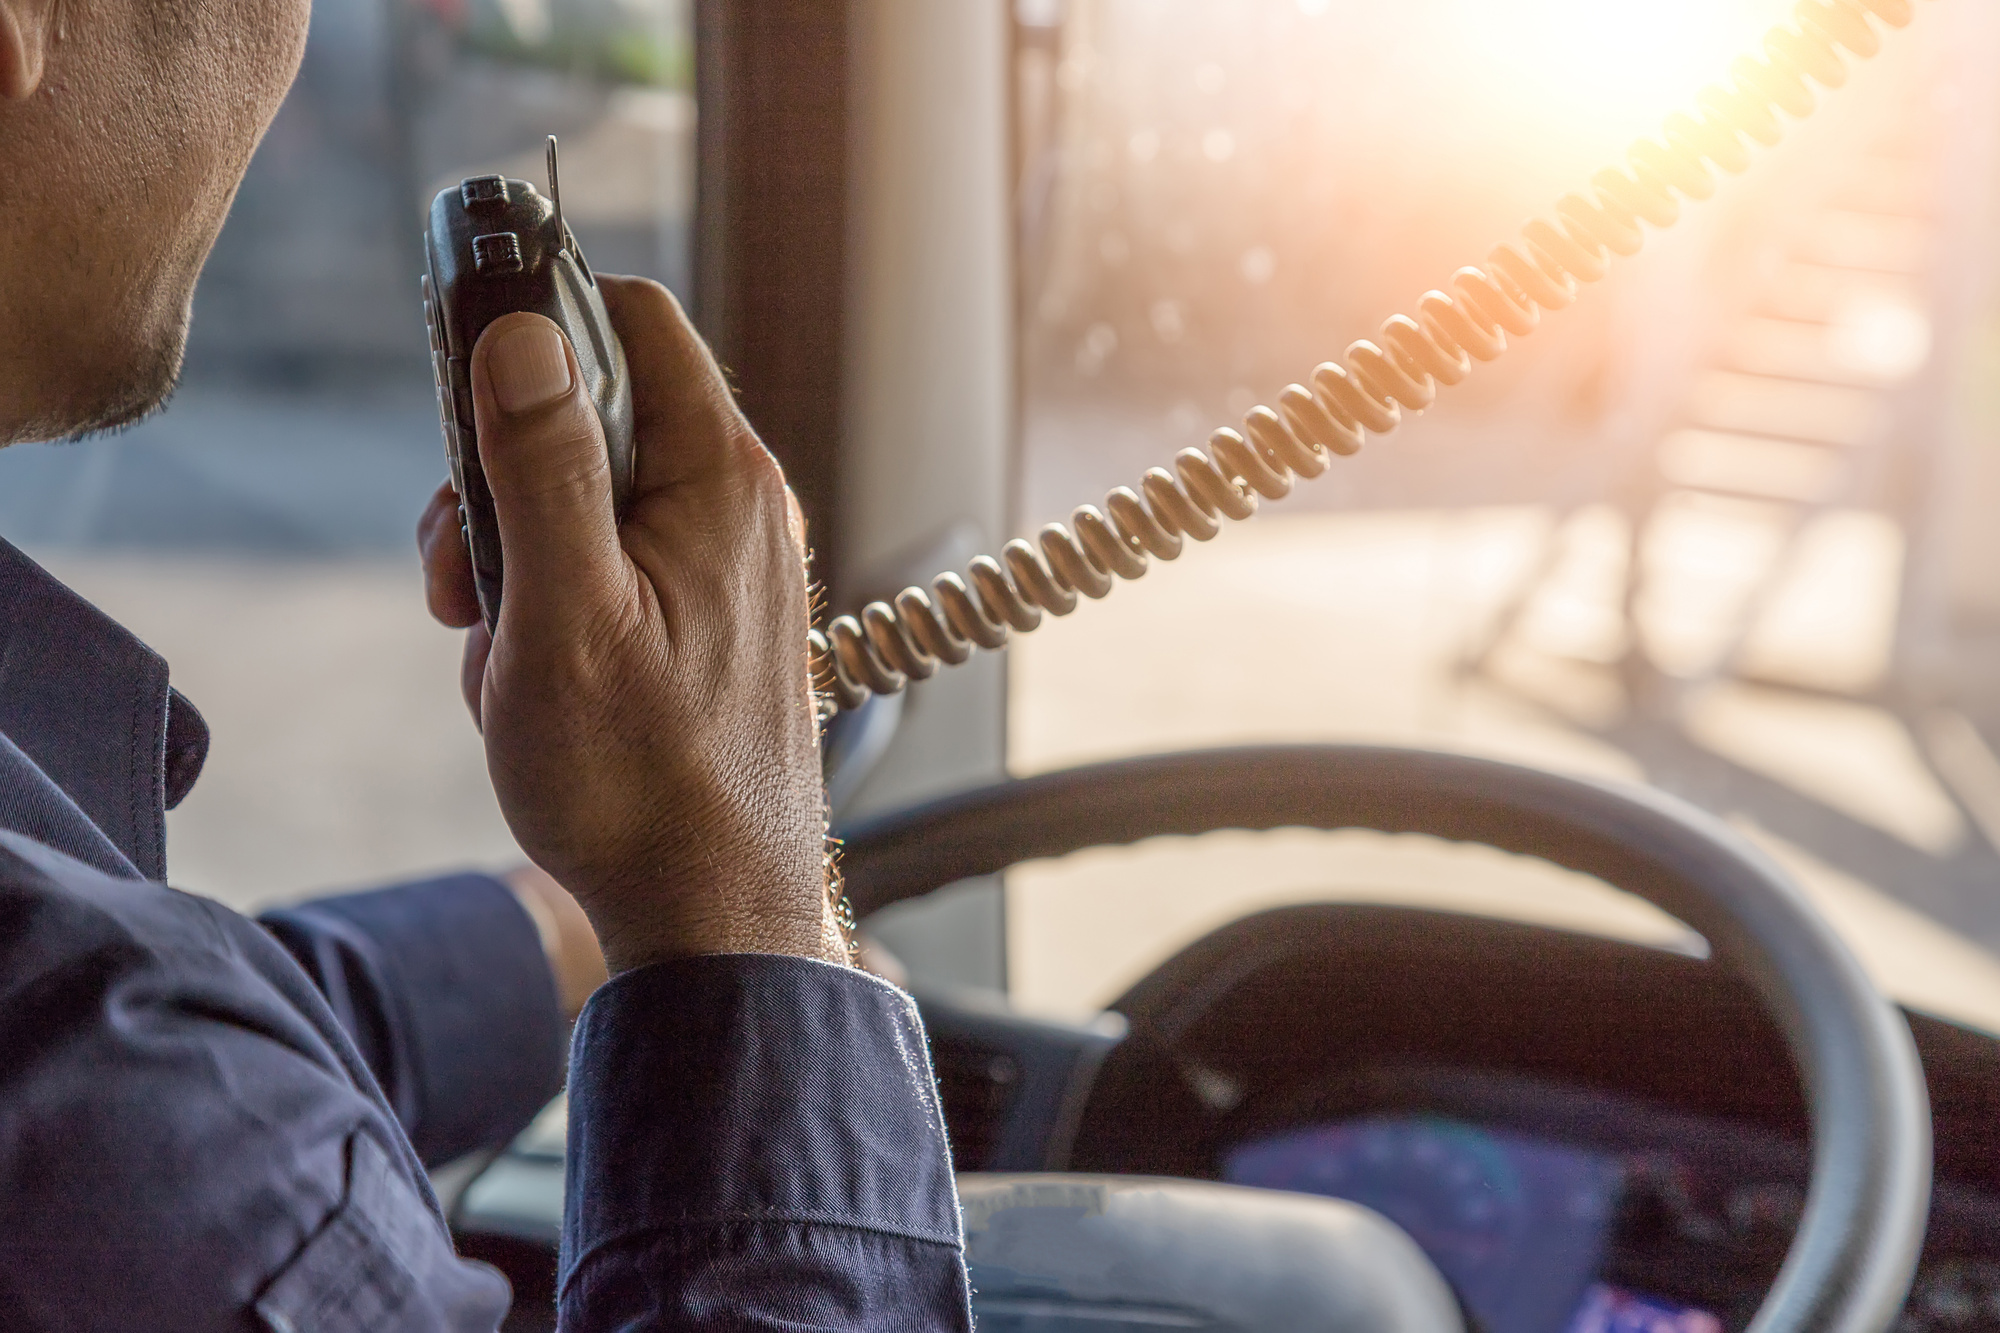 An Essential Guide To Using CB Radios Legally